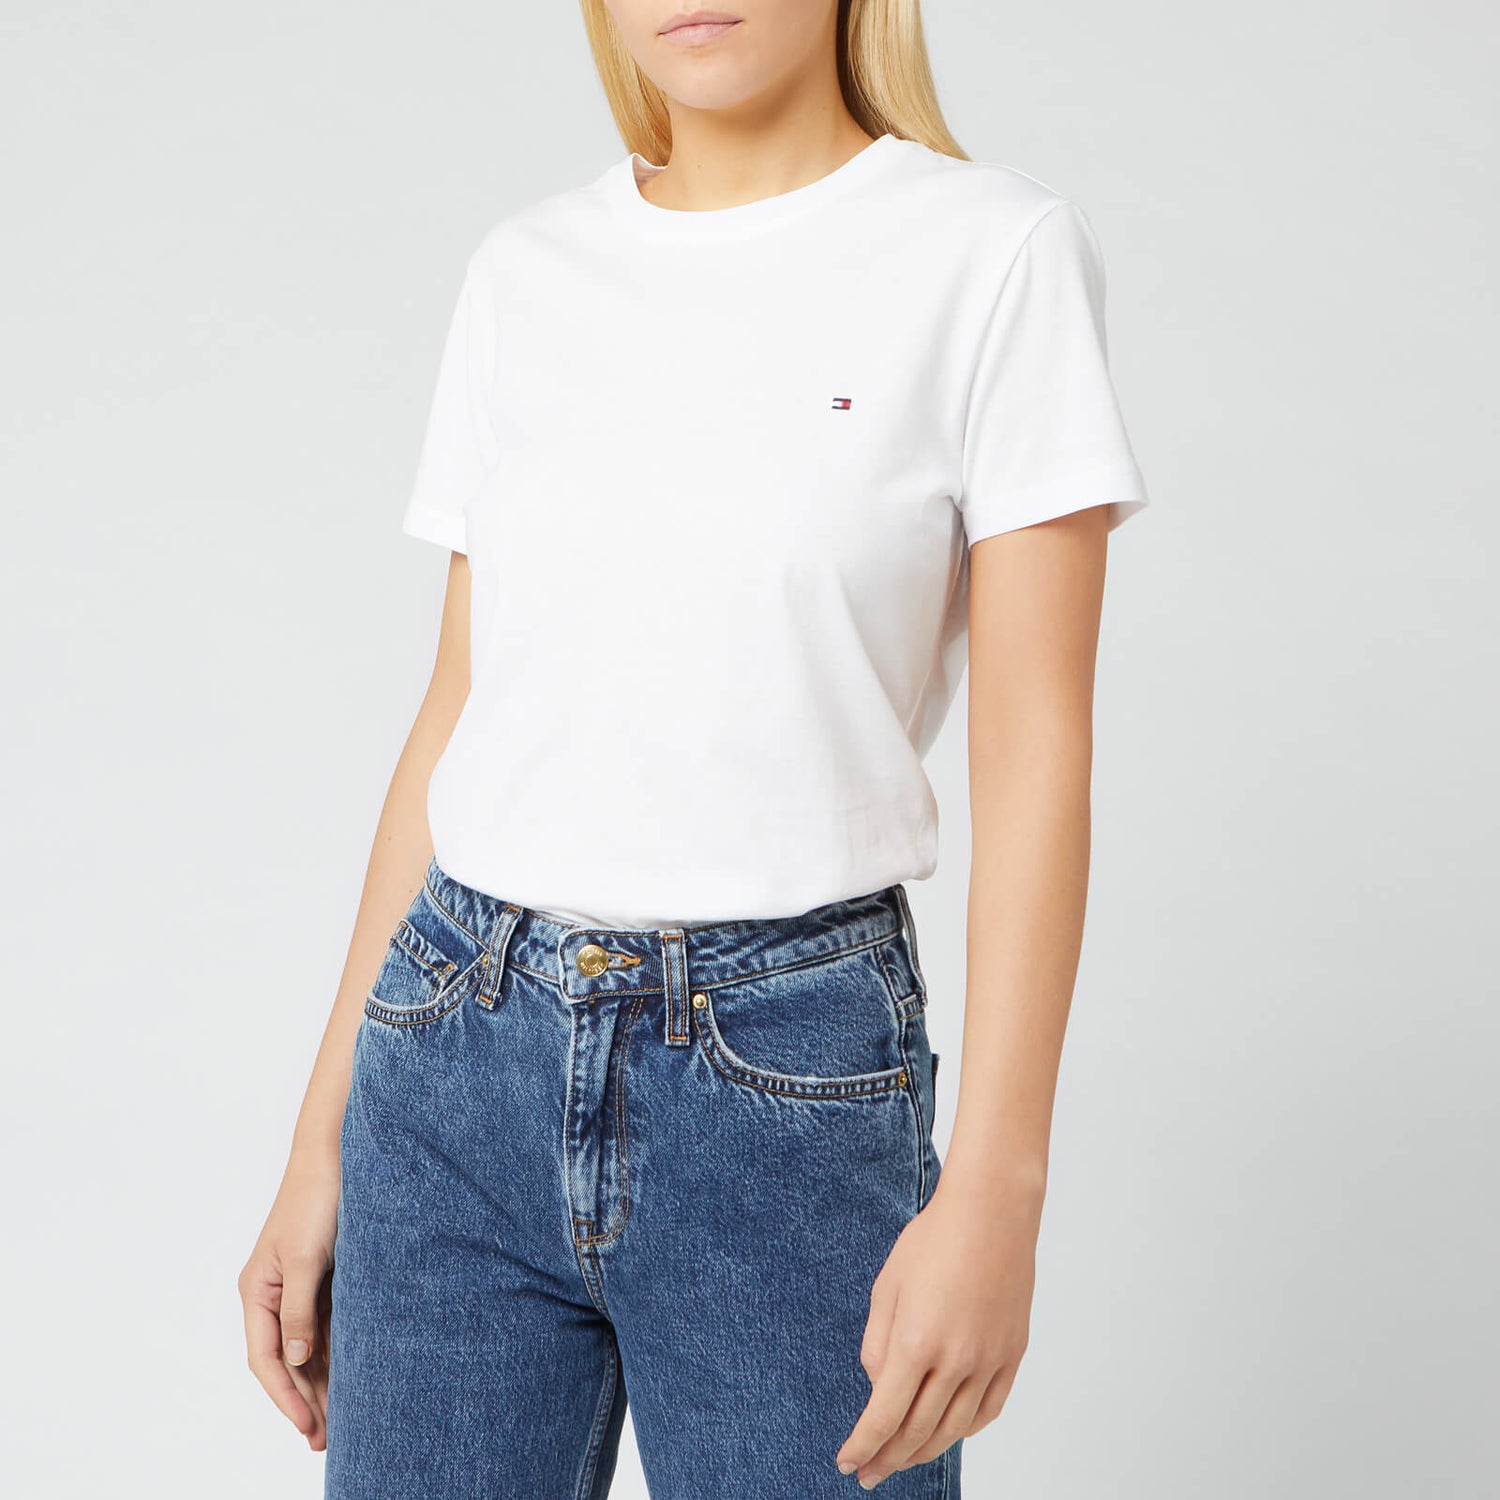 Tommy Hilfiger Women's Heritage Crew Neck T-Shirt - Classic White - XS